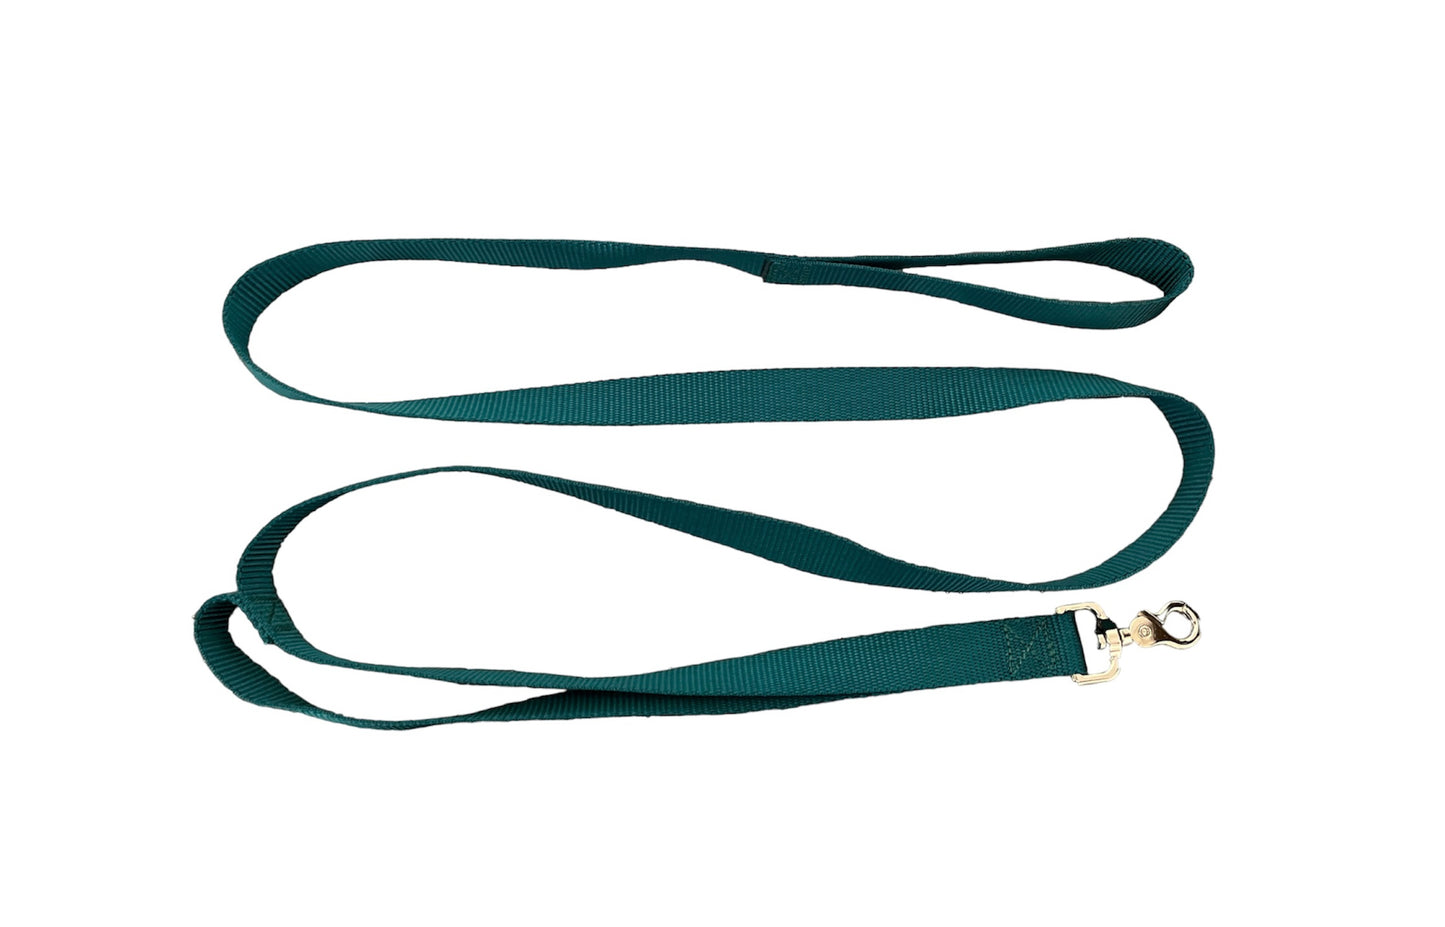 1" Nylon Leash 4' or 6' WITH TRAFFIC HANDLE